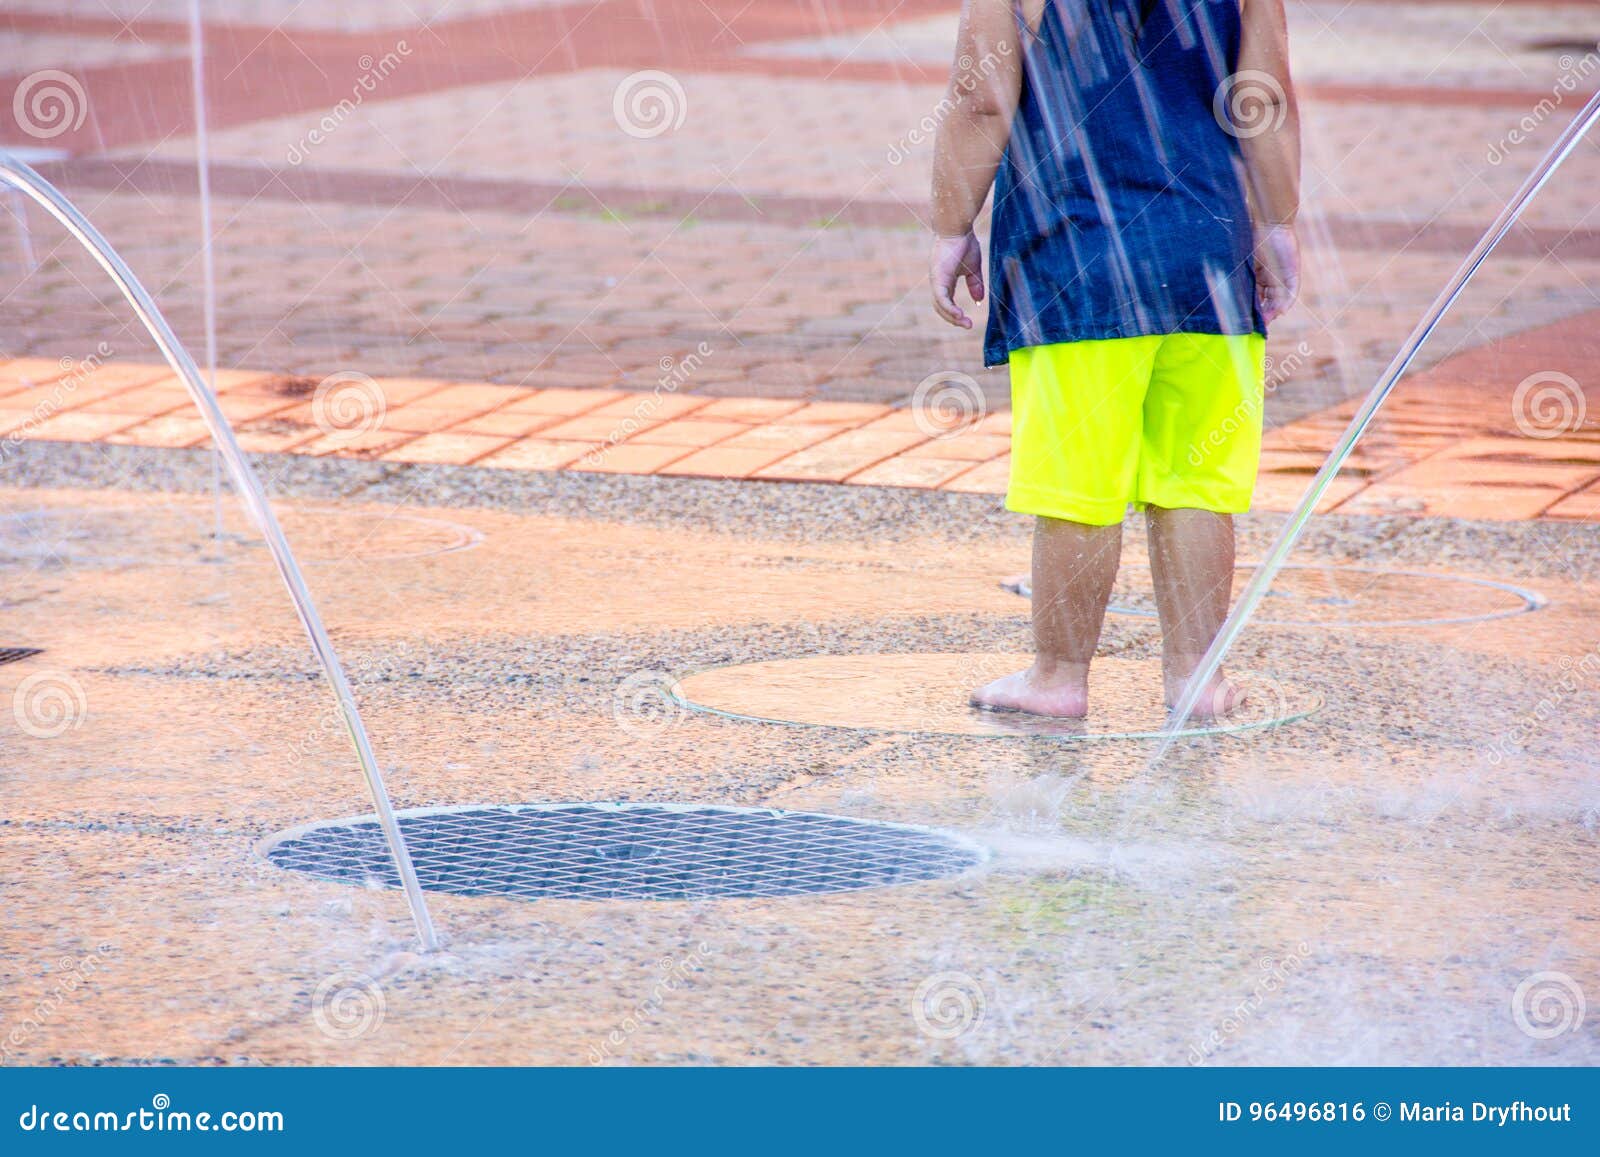 young child in city splash pad